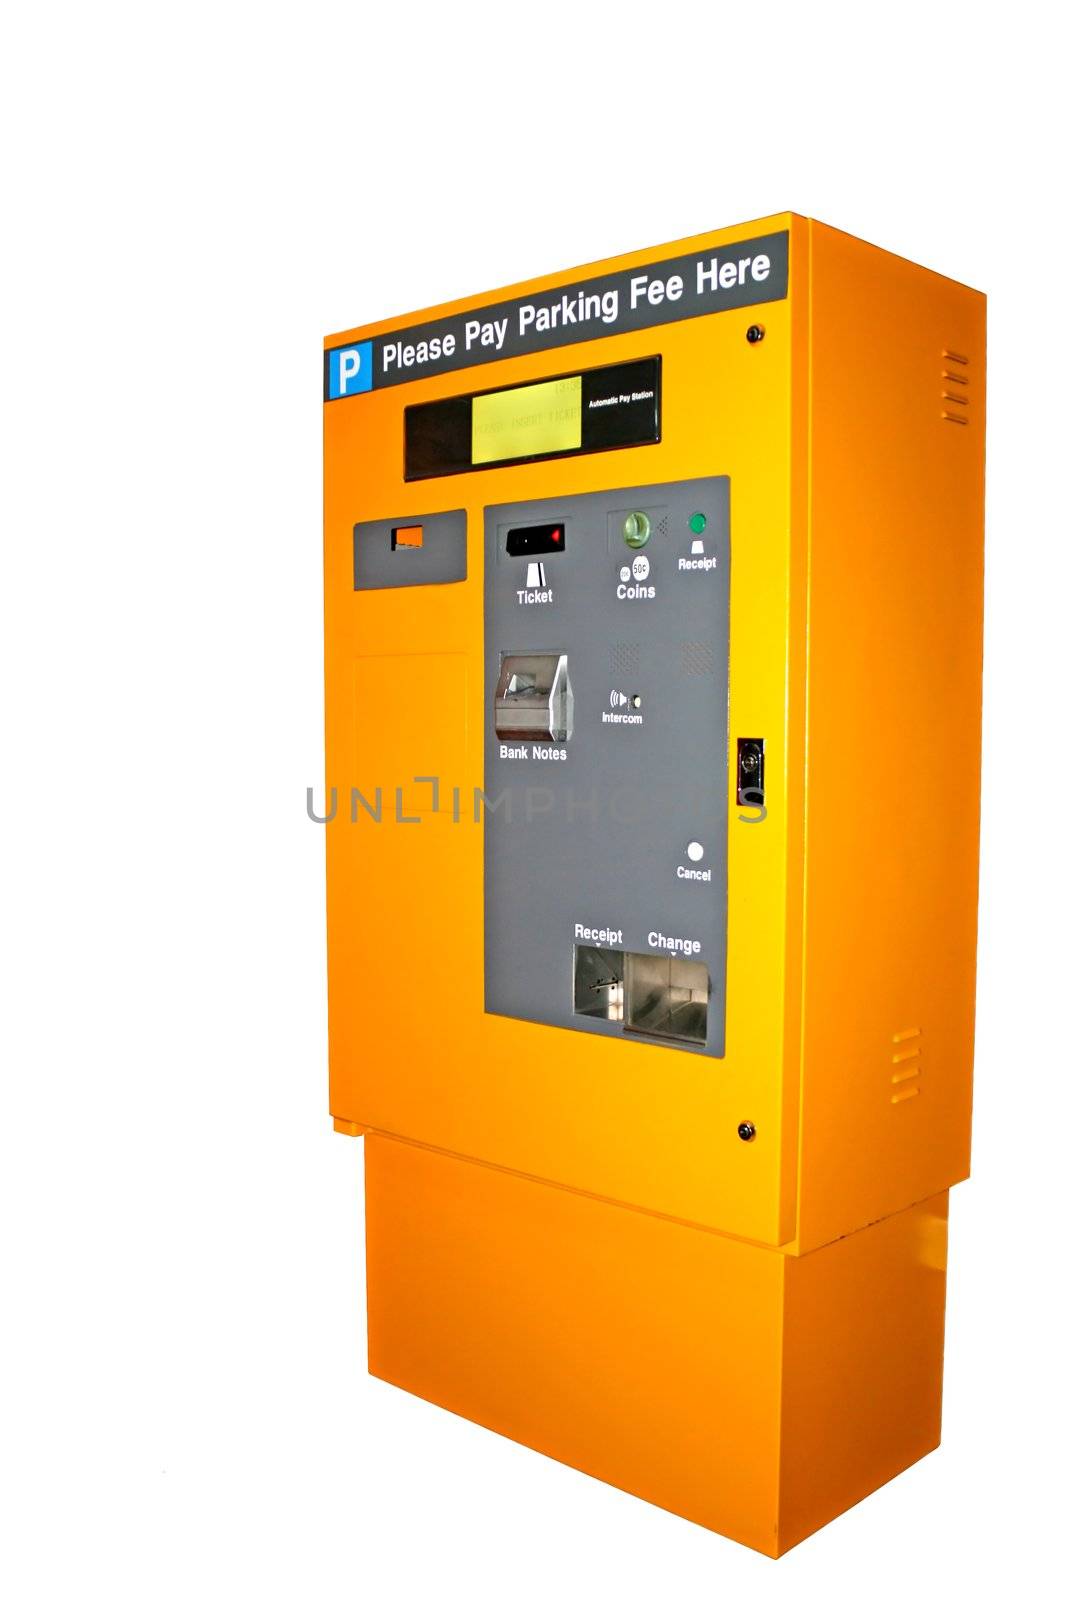 Image of an automatic parking ticket machine.